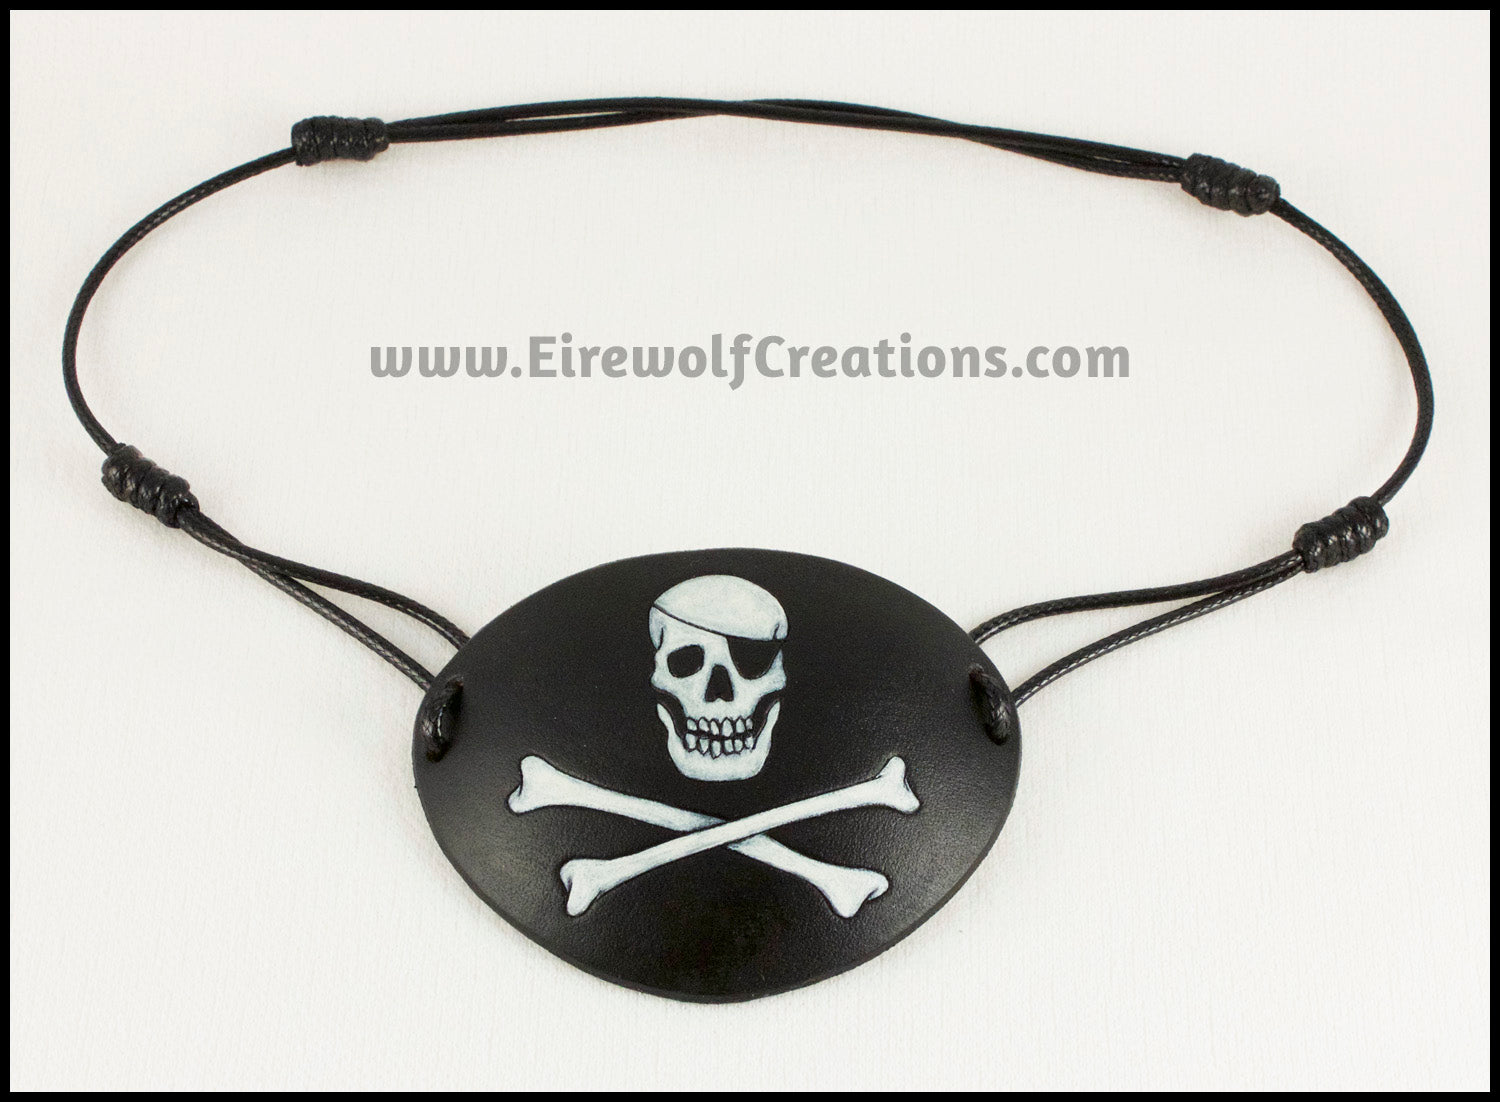 Pirates Wear Eyepatches, Pirate Accessories Eye Patch